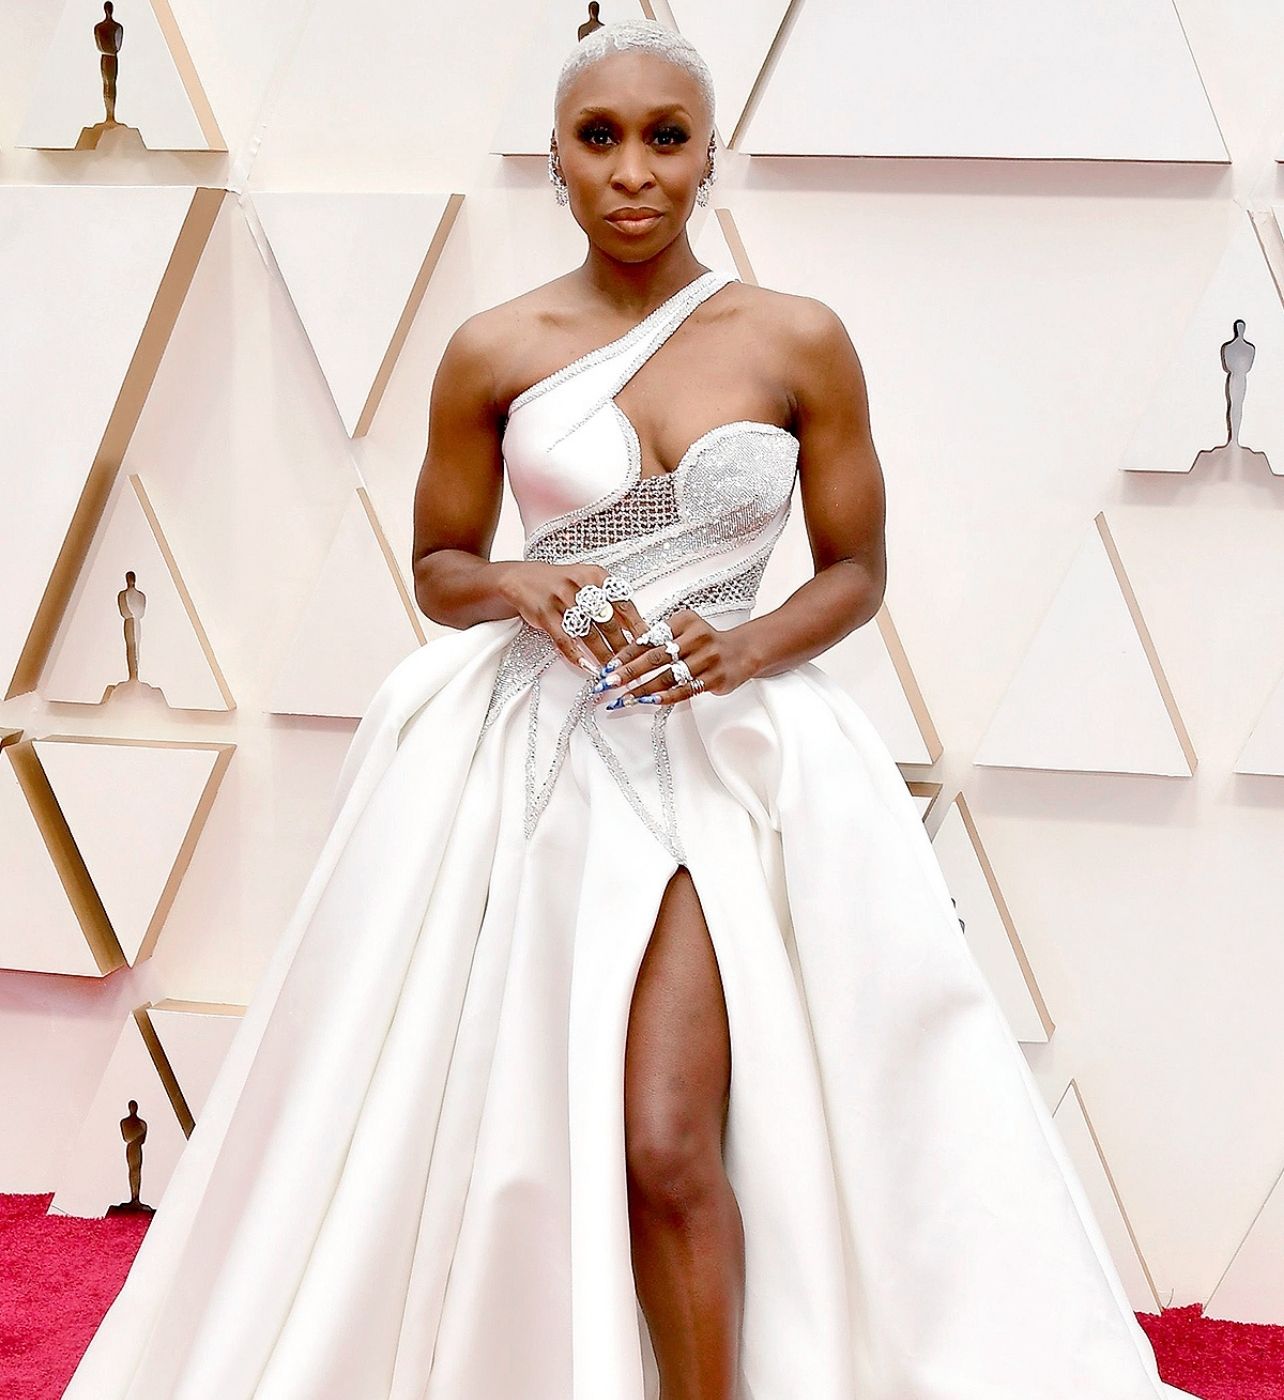 Cynthia Erivo photographed at the 2020 oscars in a white gown